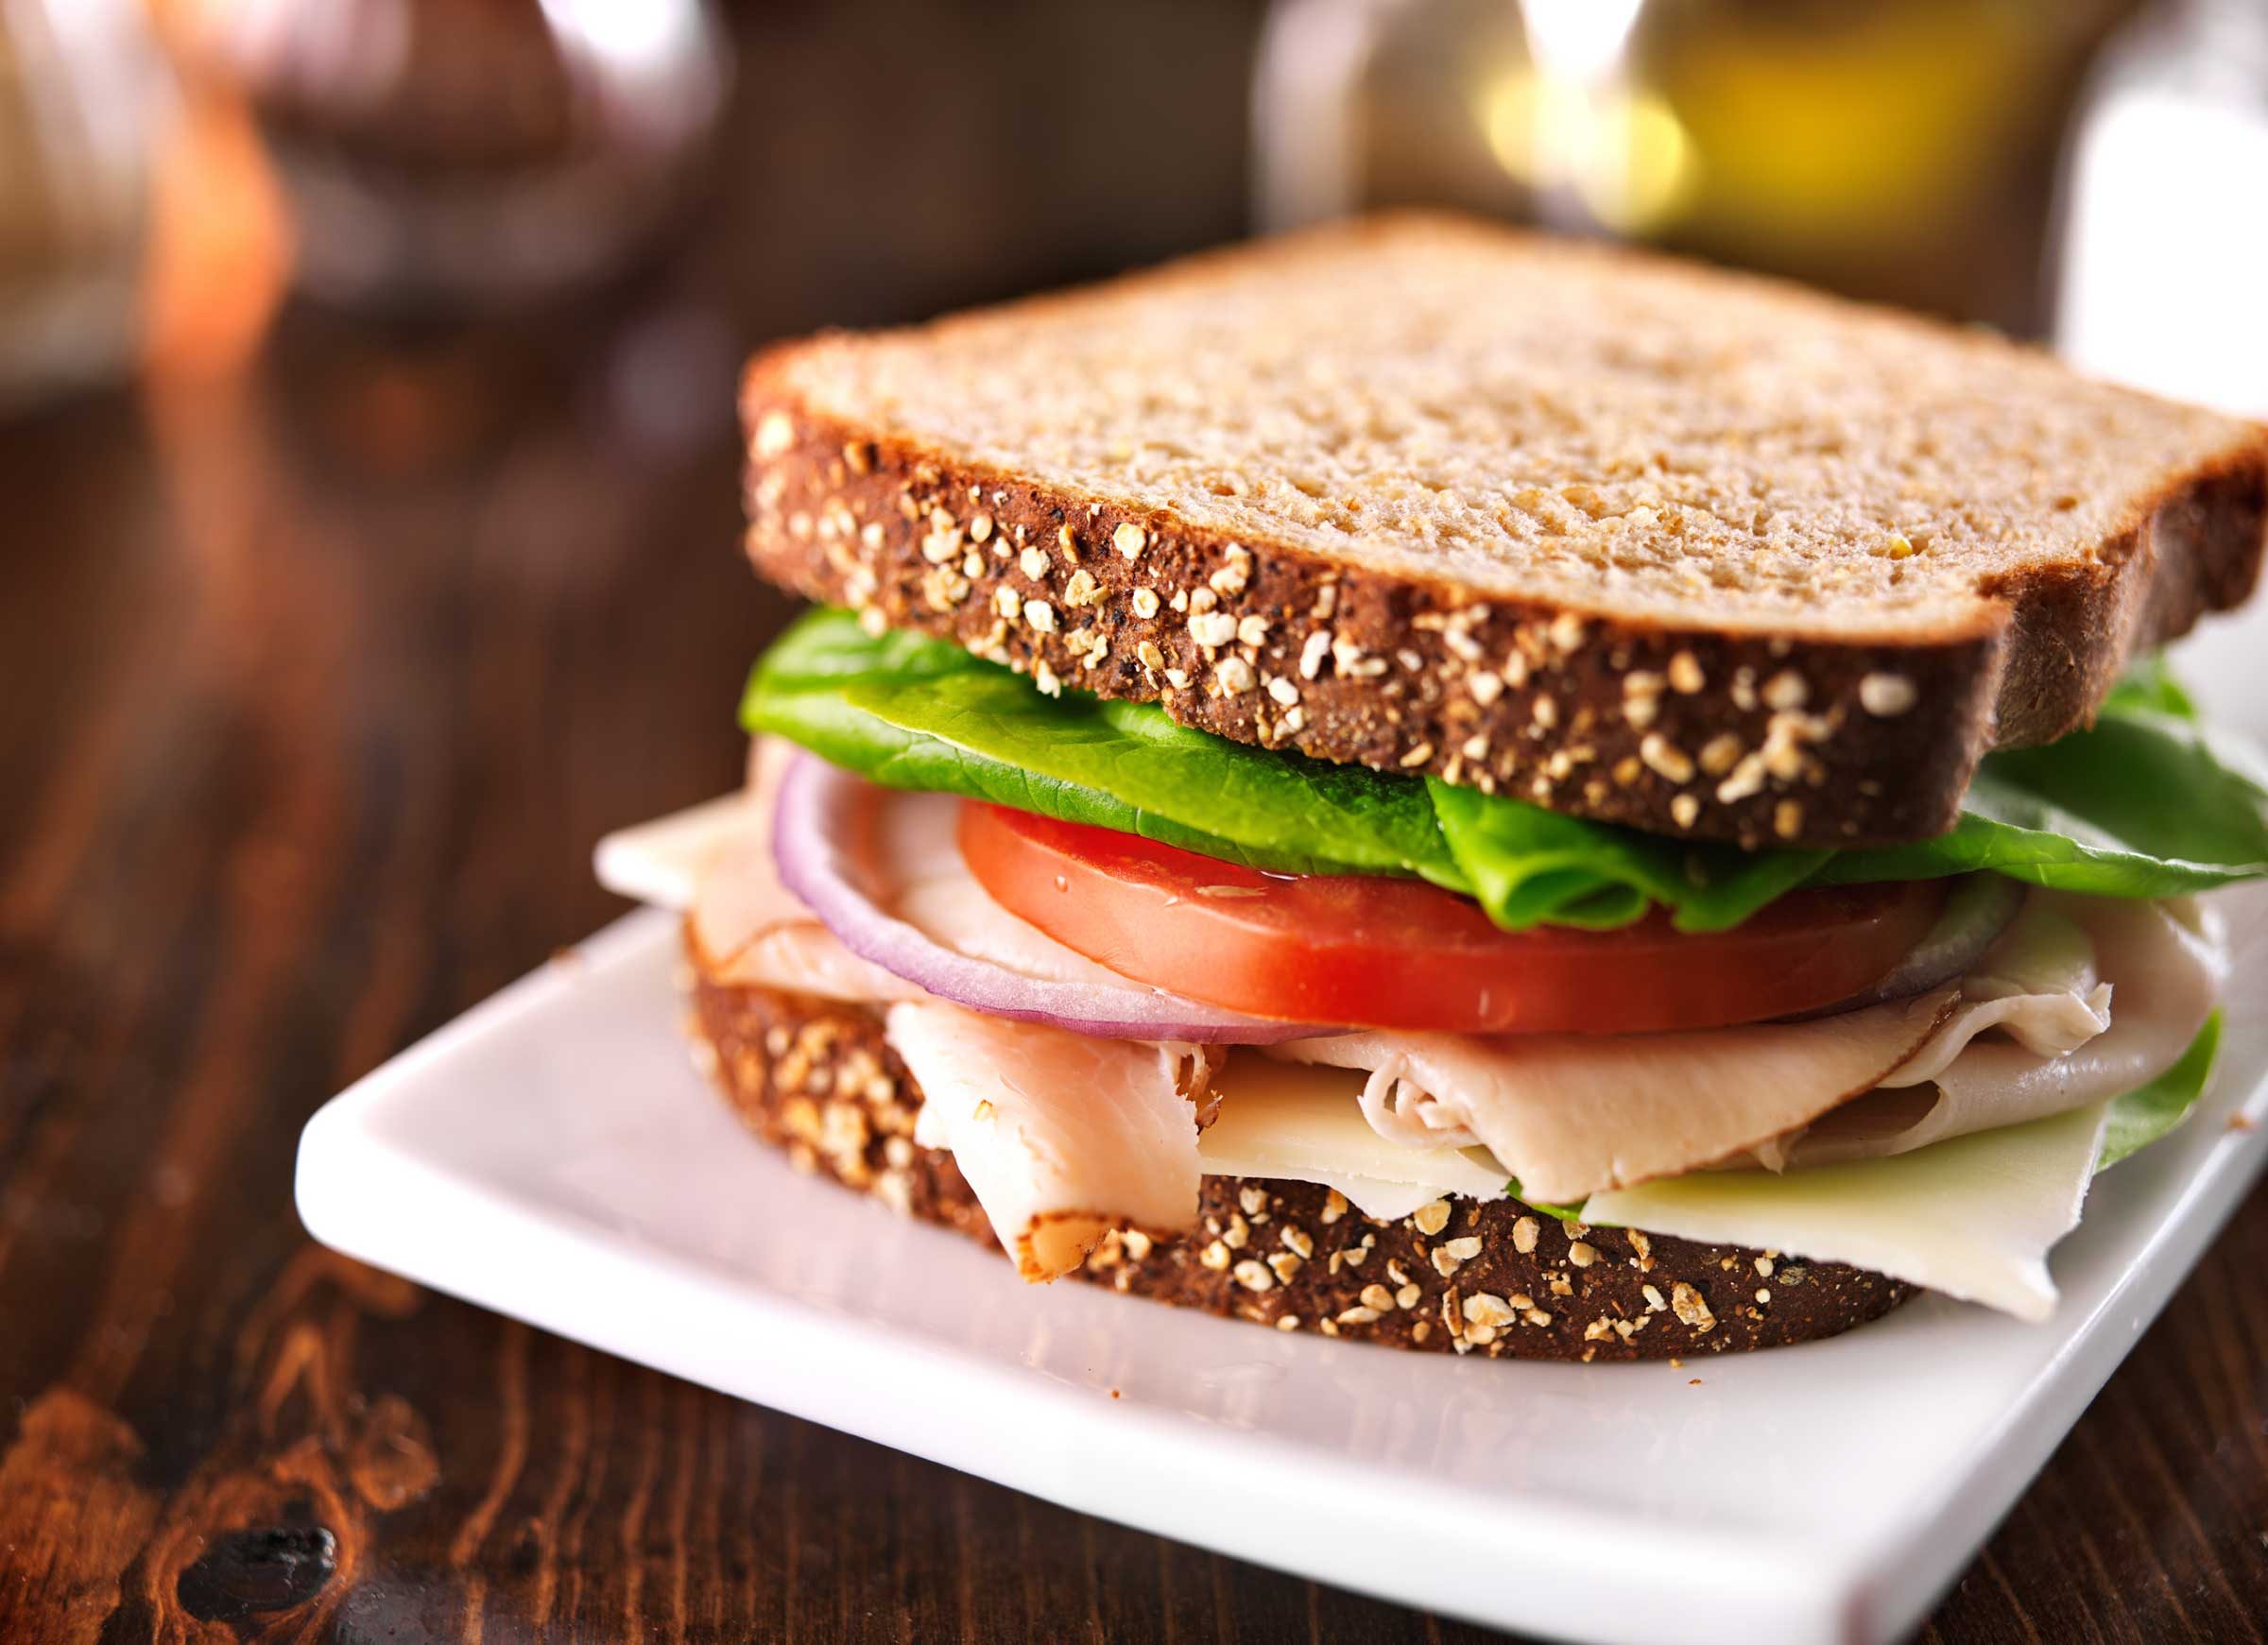 How to Make a Sandwich: 7 Layers to Add | Reader's Digest